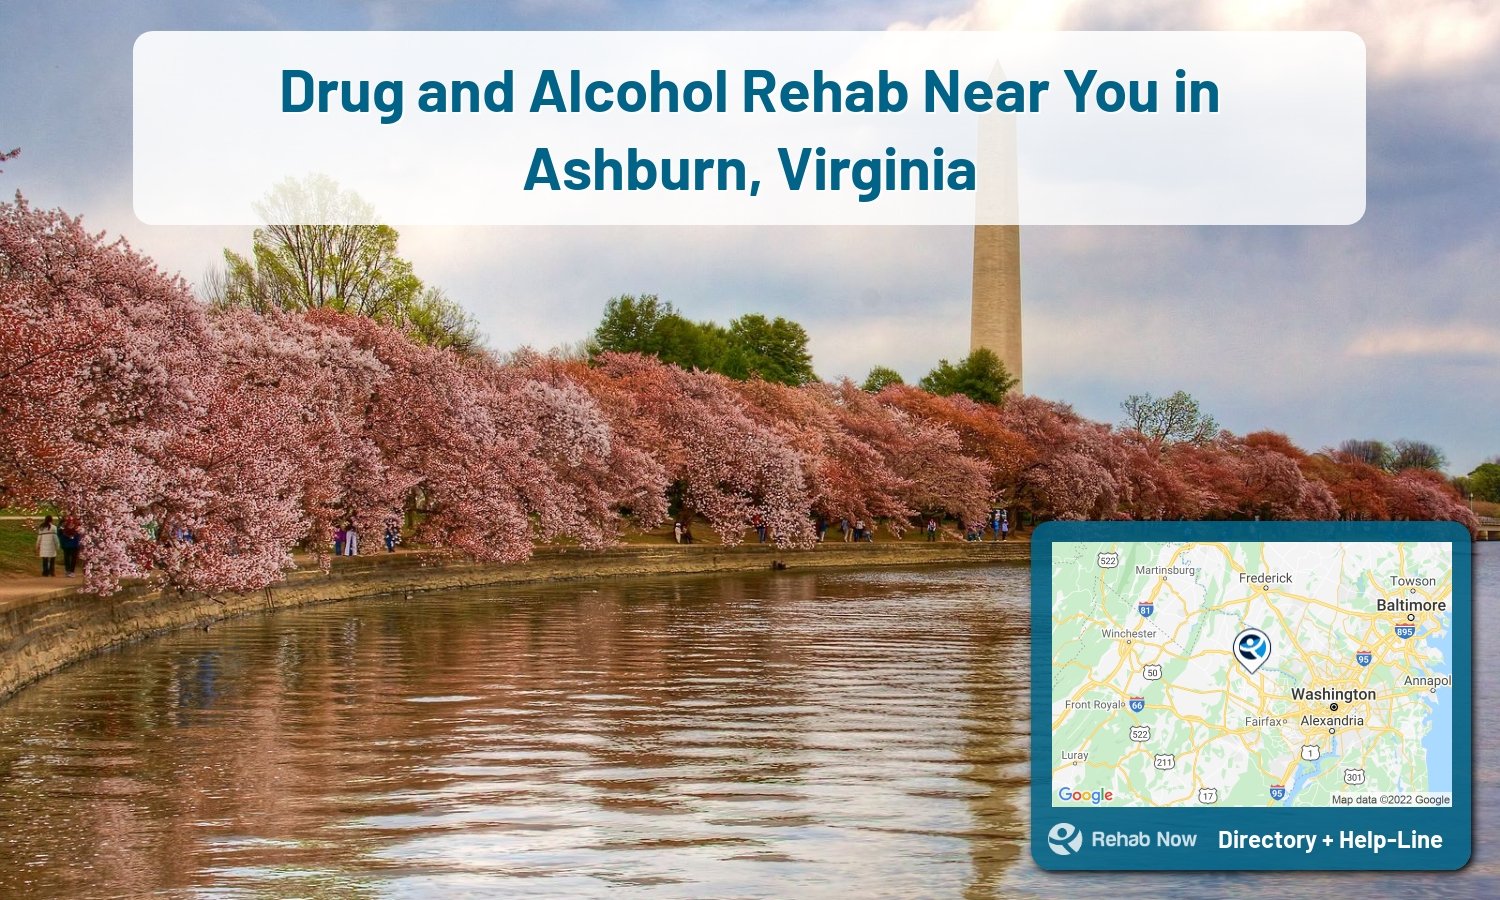 Drug rehab and alcohol treatment services near you in Ashburn, Virginia. Need help choosing a center? Call us, free.